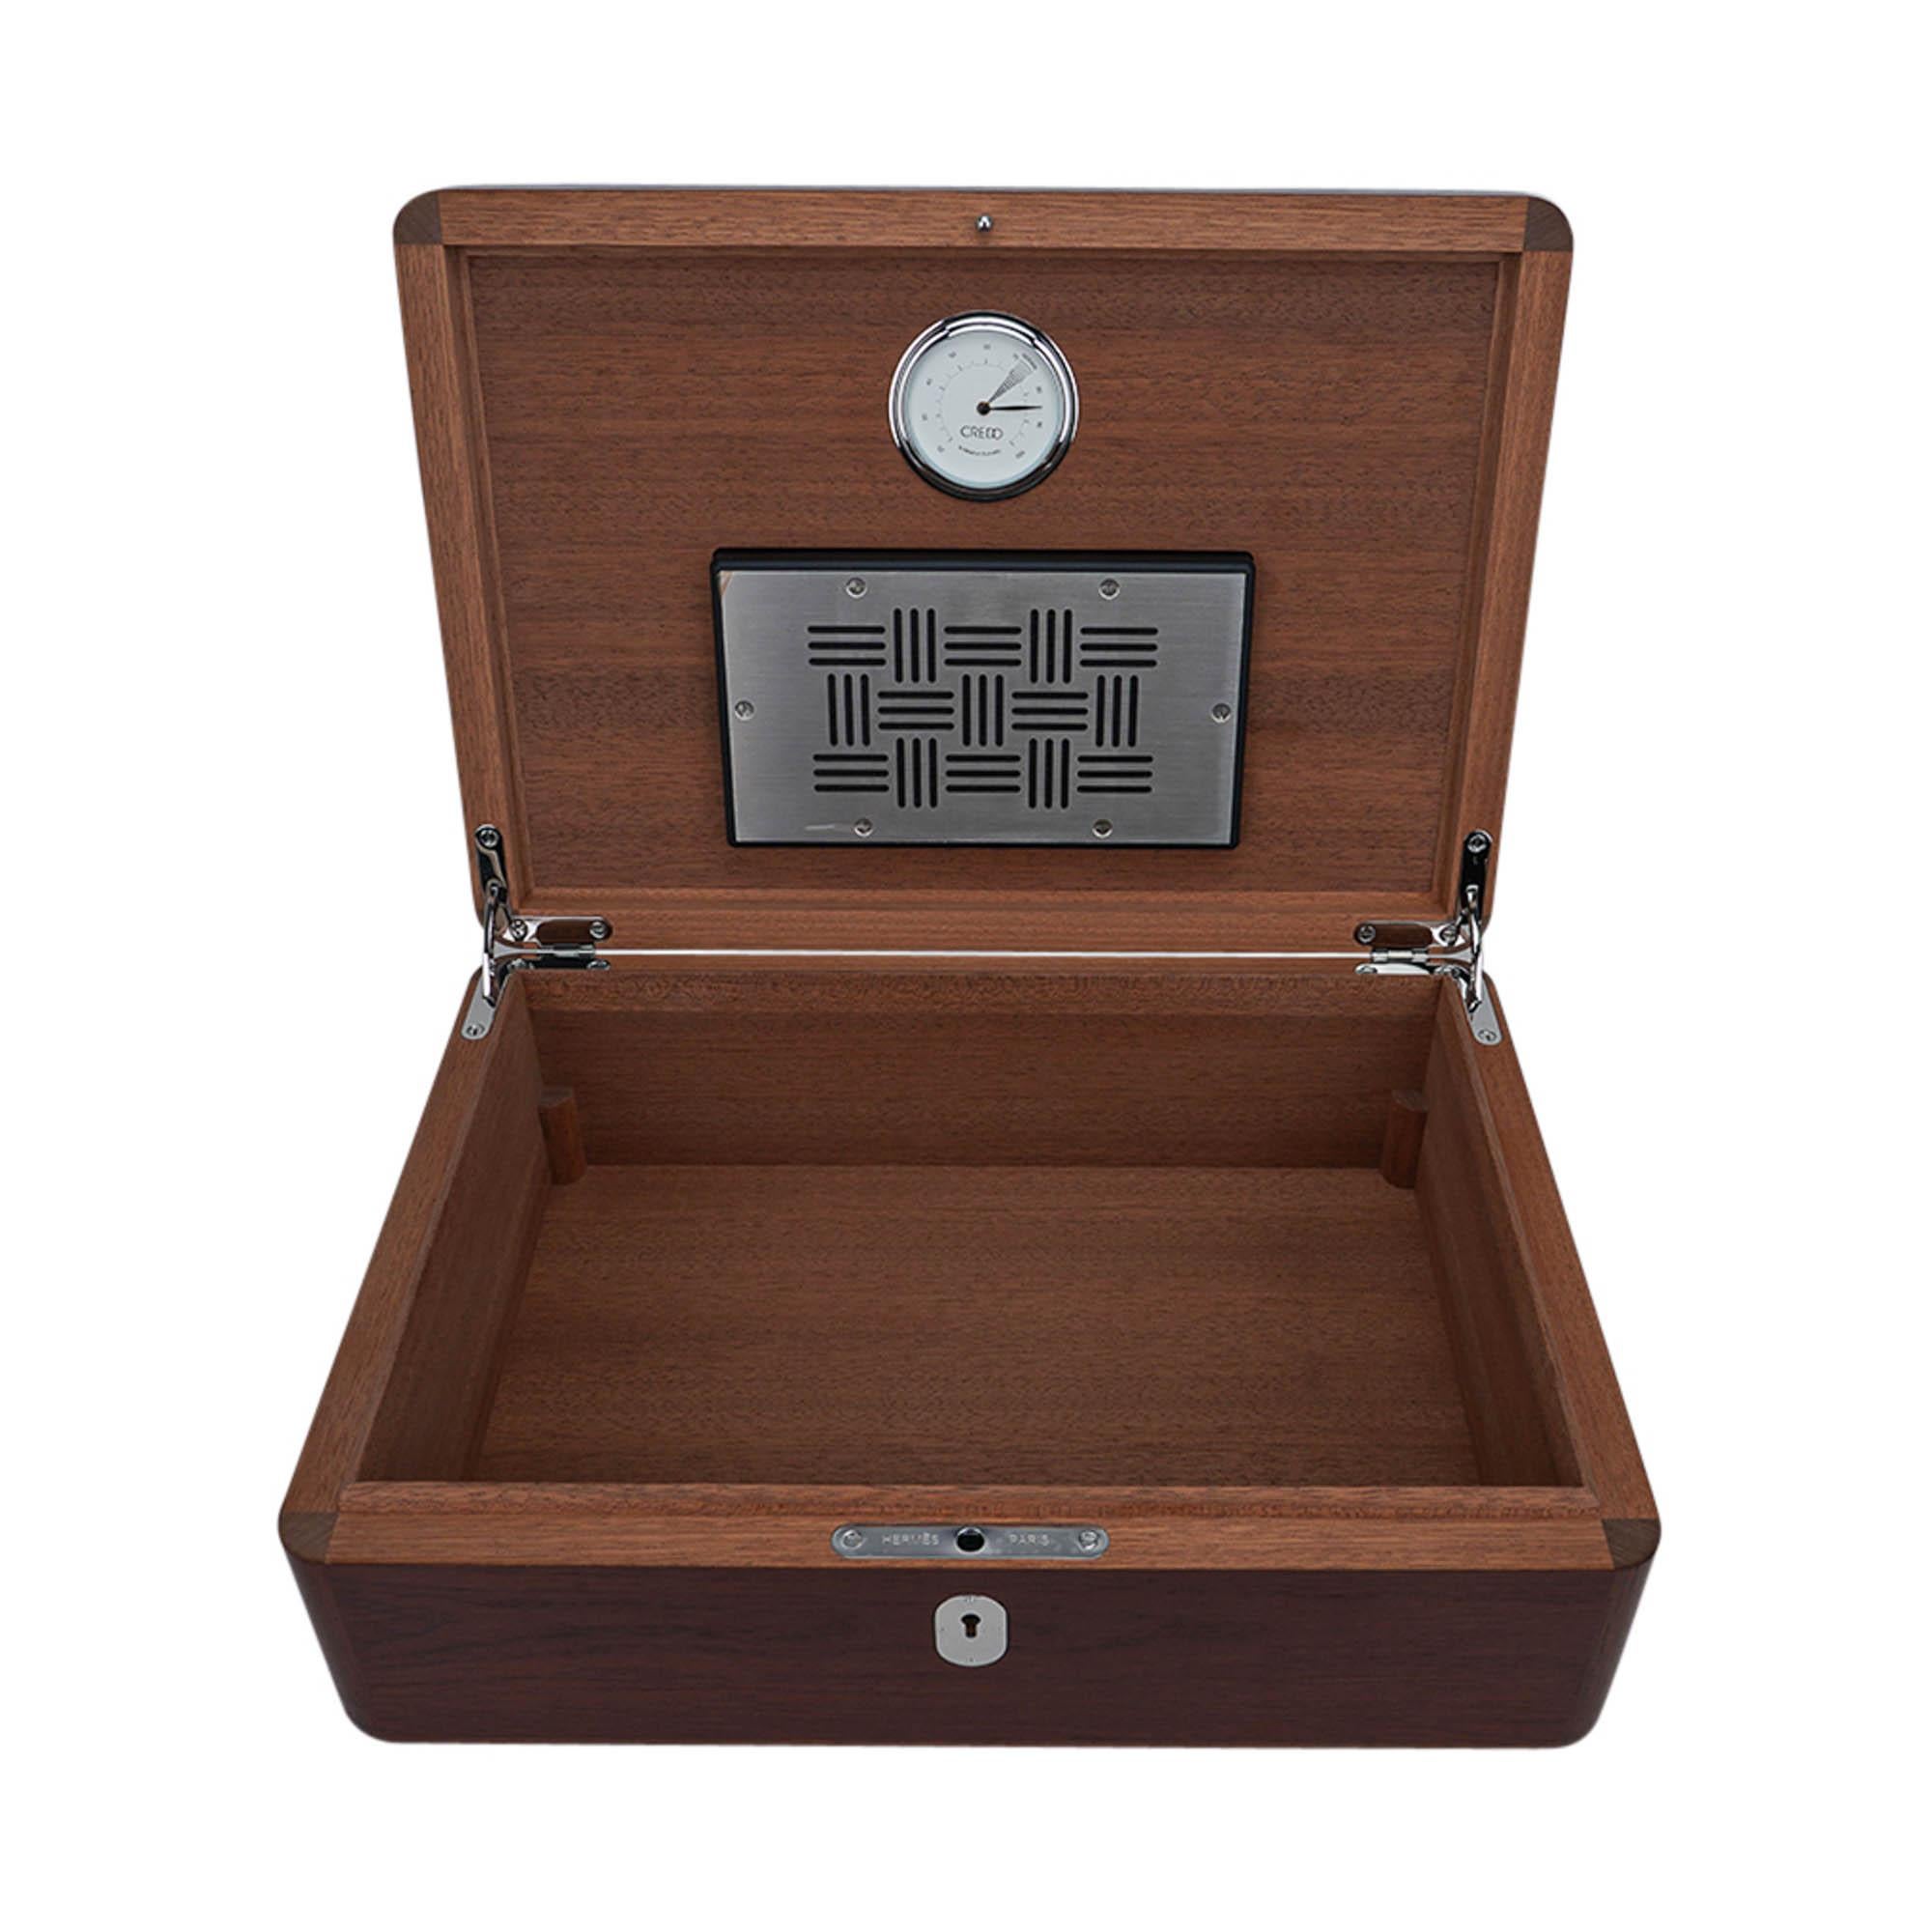 Hermes Coffret a Cigares Humidor Limited Edition Sycamore Holz Sesam Eidechse im Angebot 14